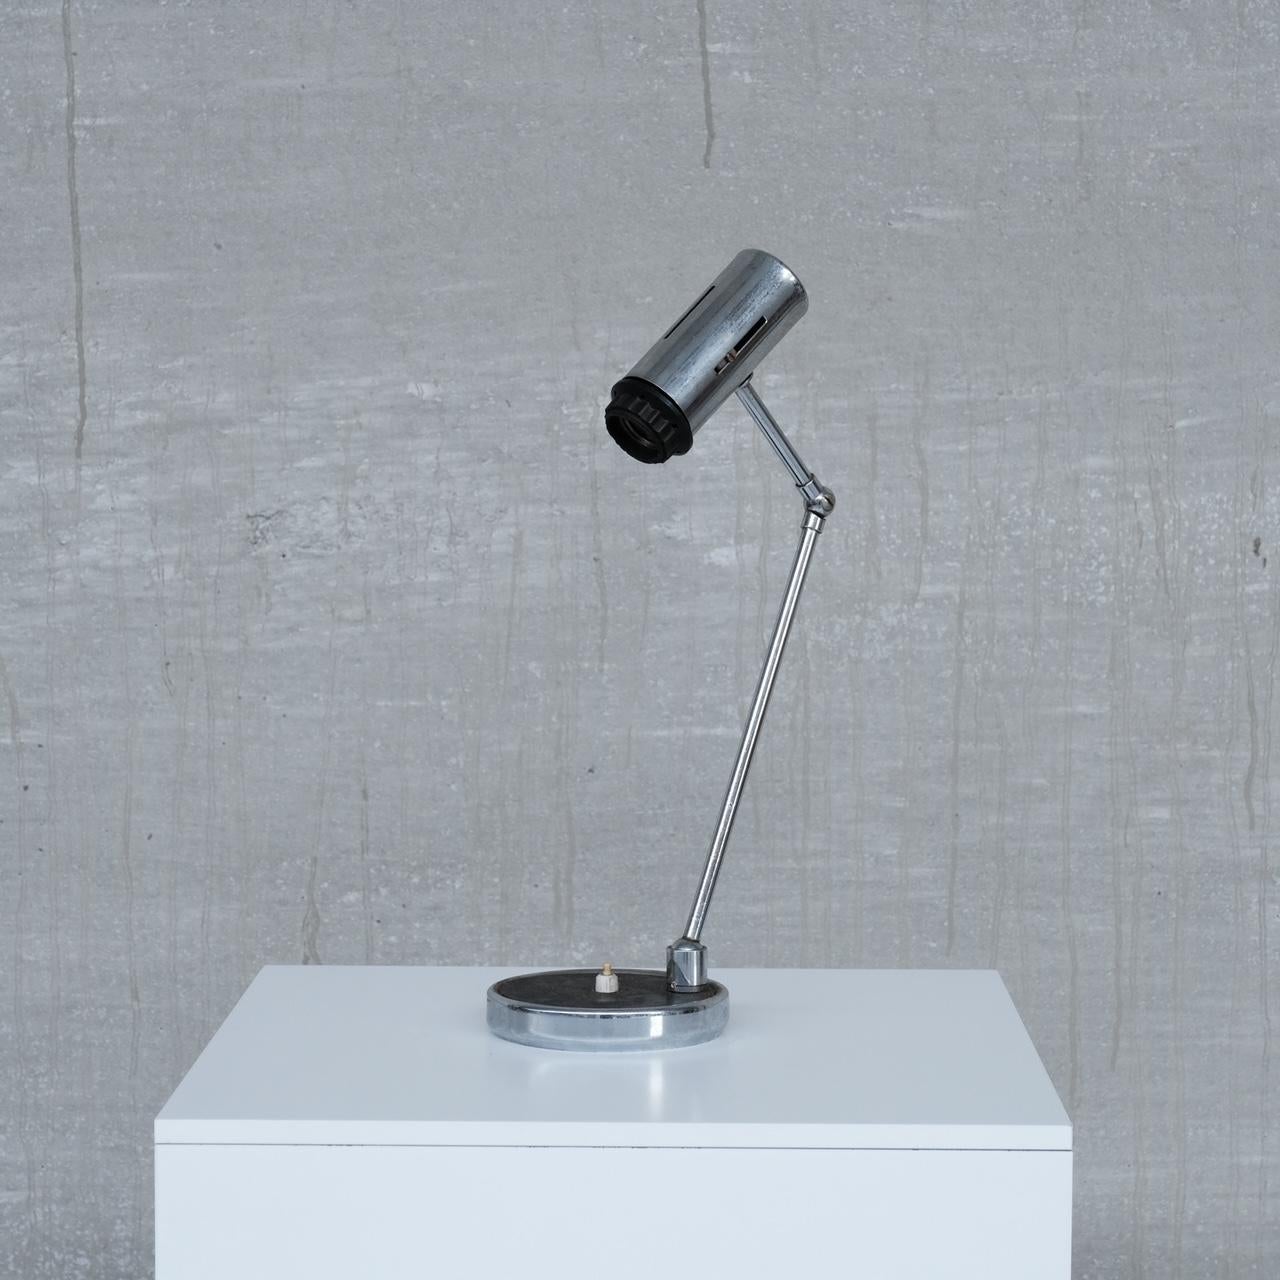 An adjustable table lamp. 

Likely Italian, c. 1960s. 

Would look great with an edison bulb. 

Since re-wired and PAT tested. 

Good condition, some scuffs and wear commensurate with age. 

Location: Belgium Gallery. 

Dimensions: 46.5